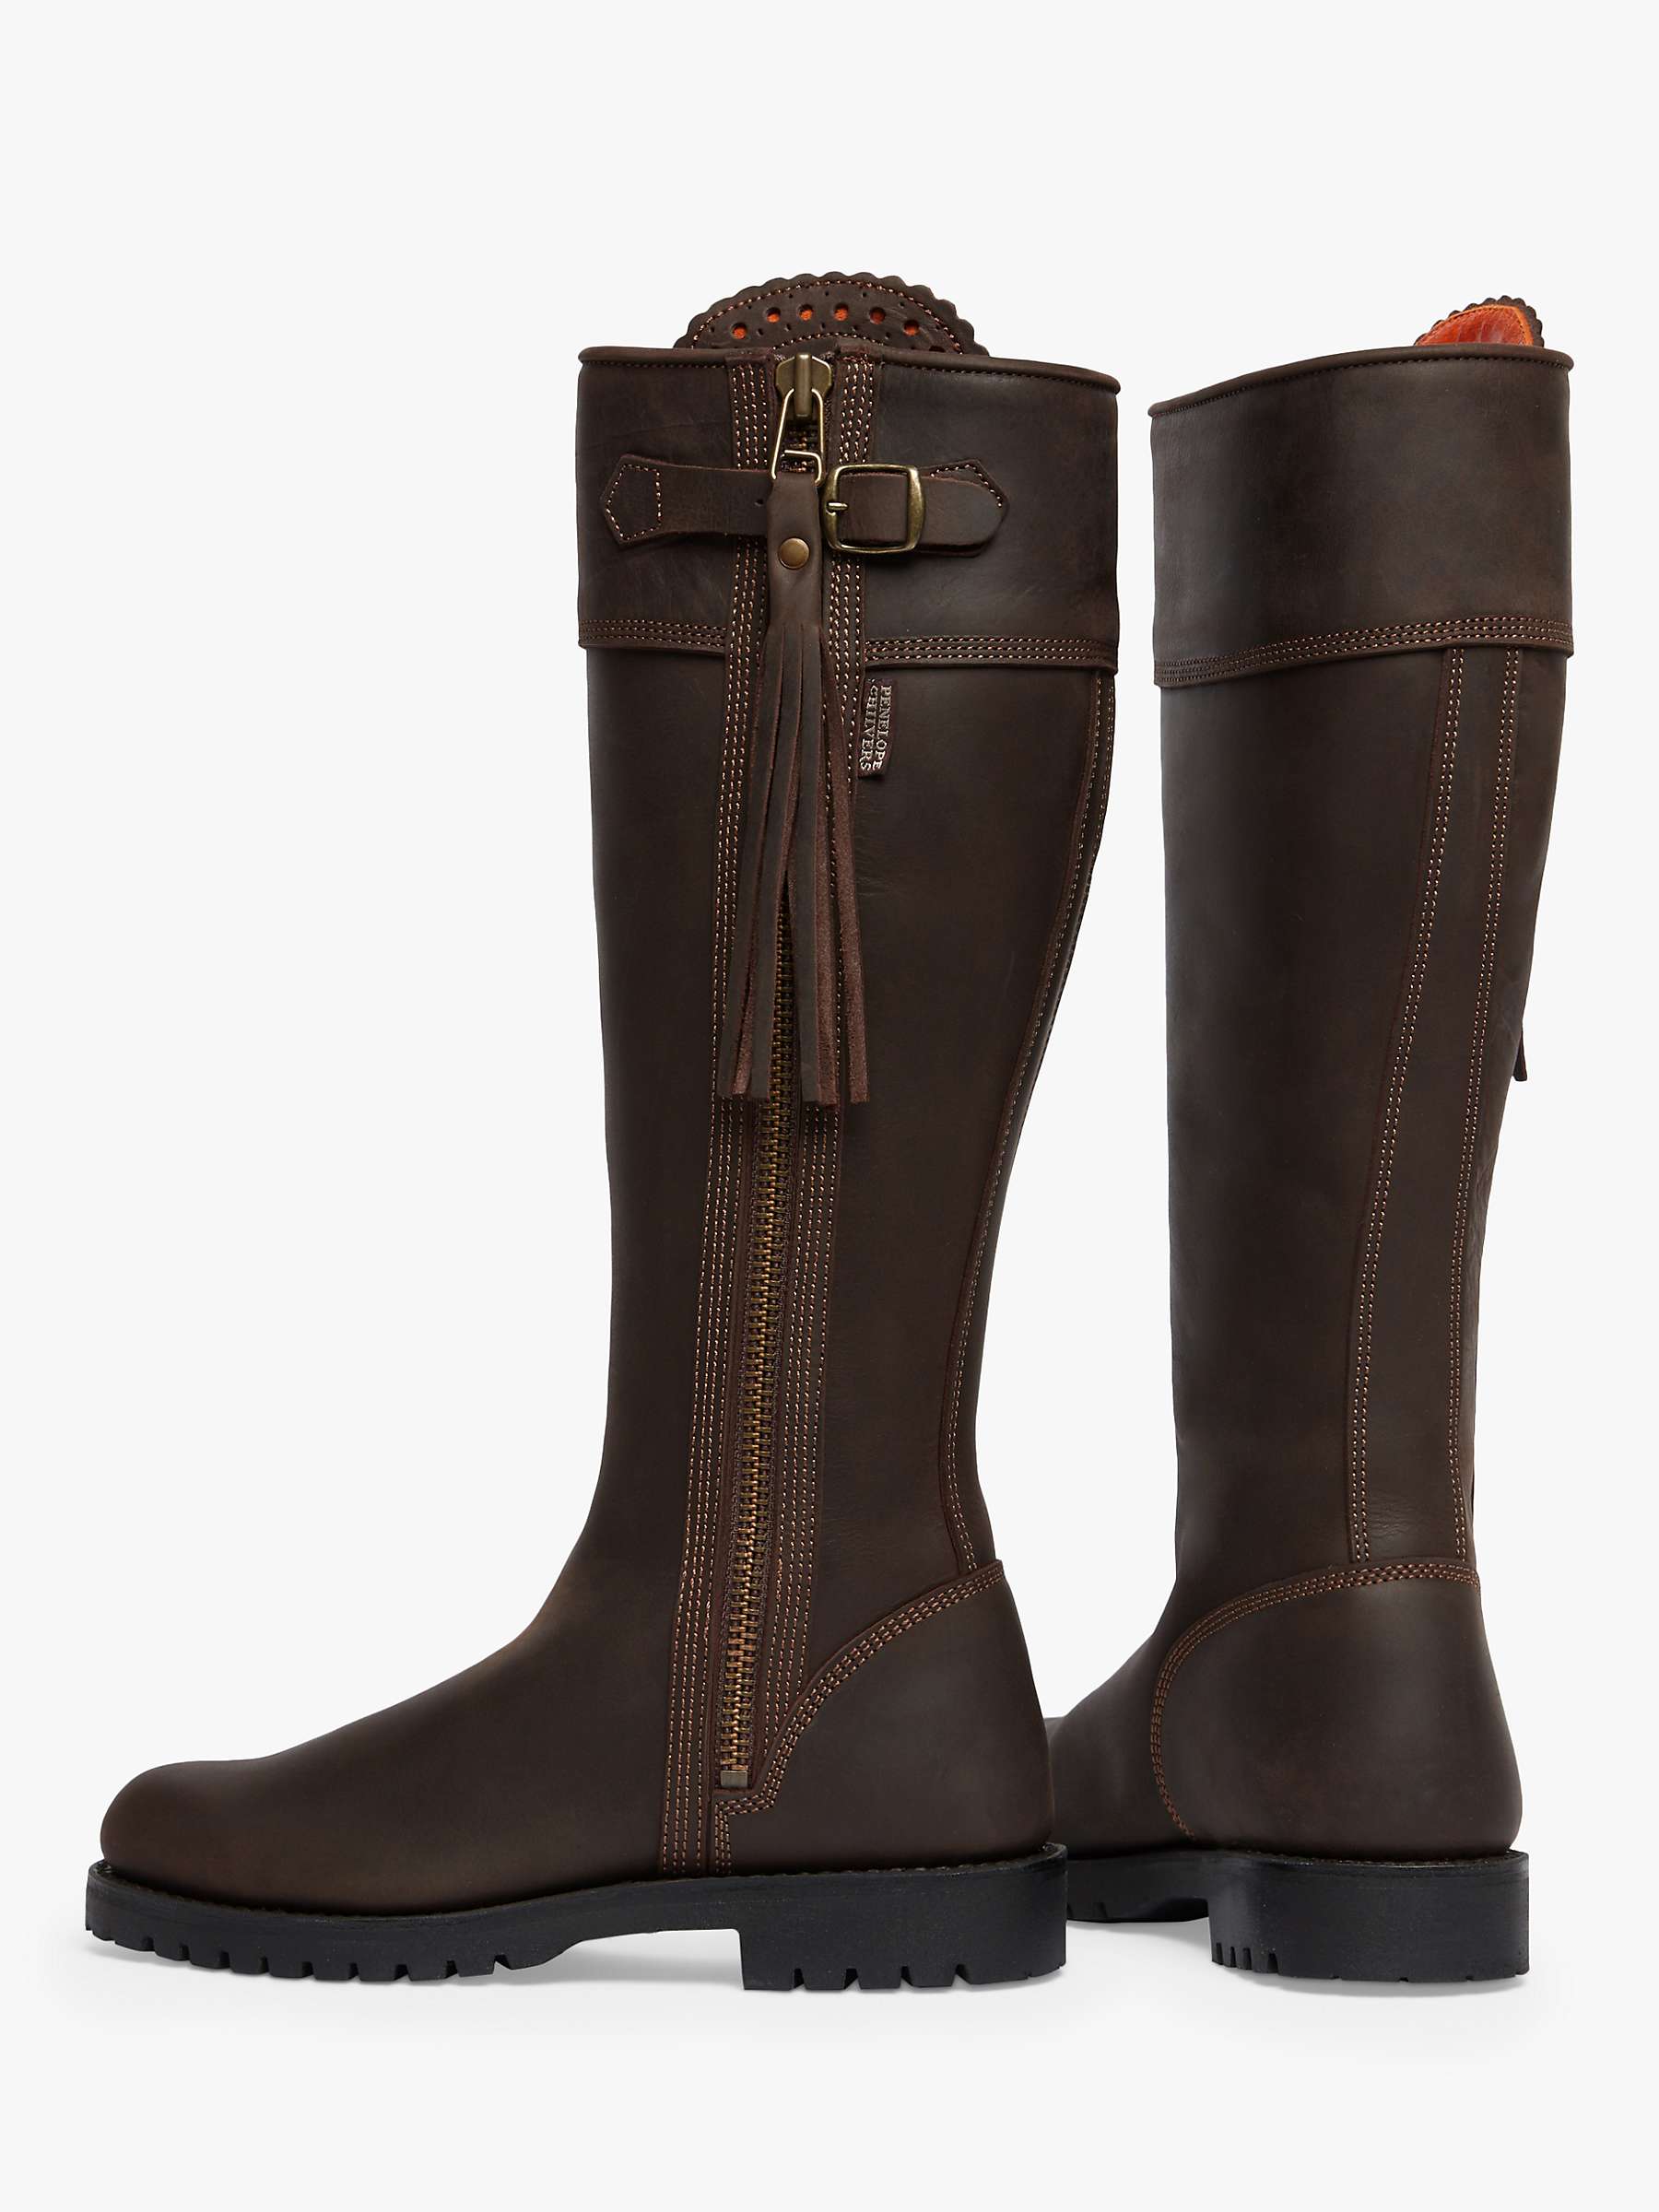 Buy Penelope Chilvers Stand Tassel Knee Boots, Conker Online at johnlewis.com